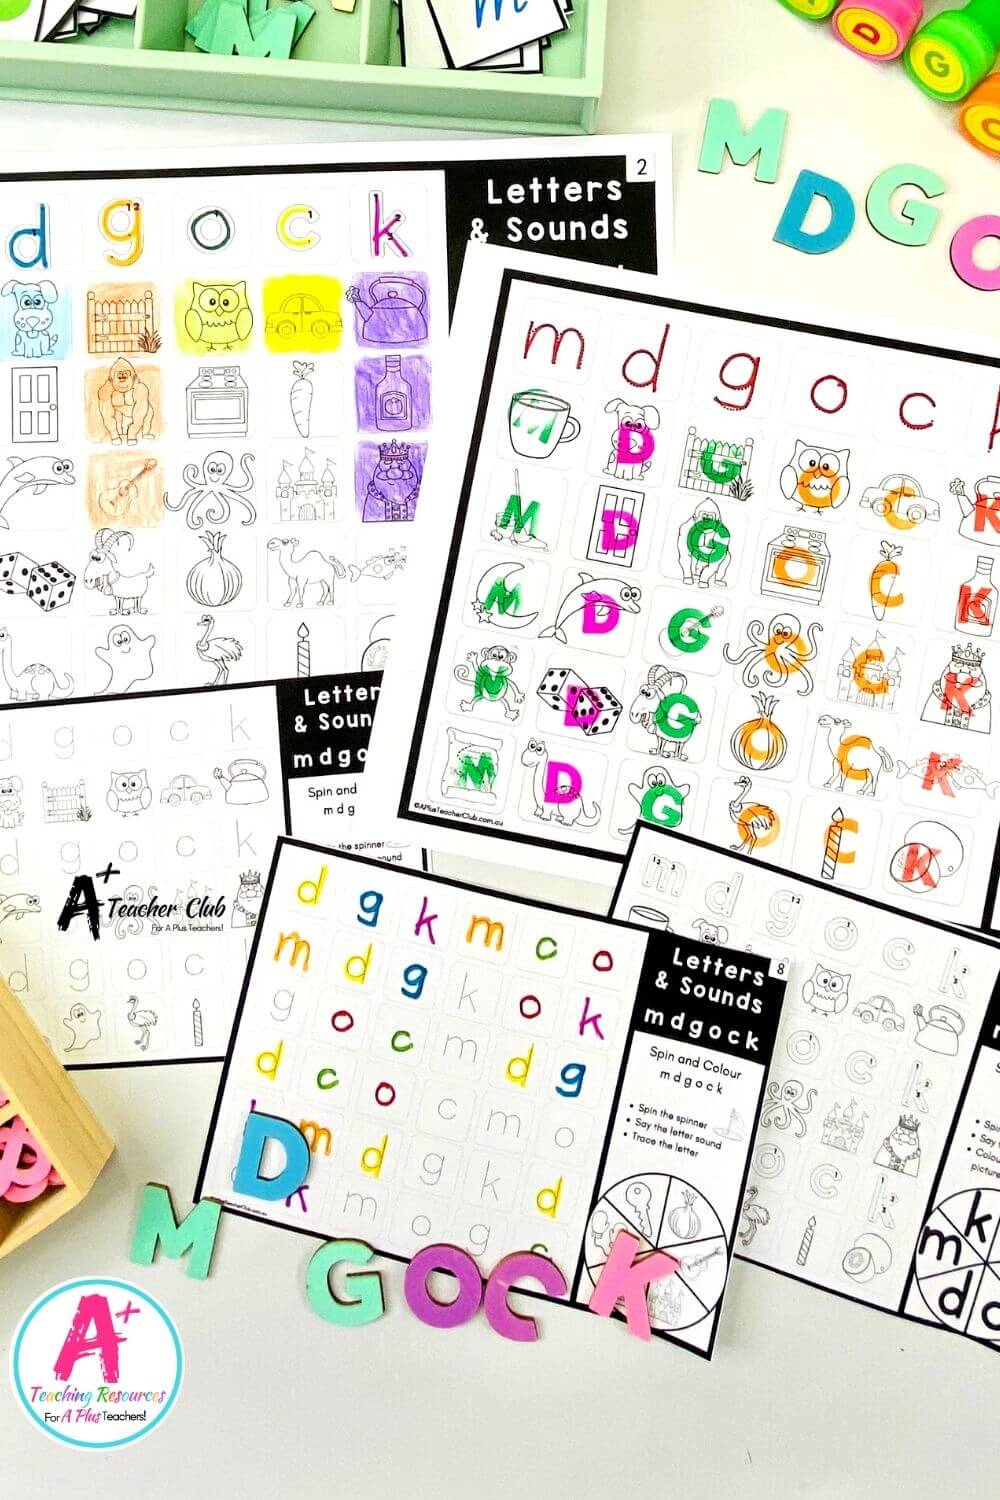 MGDOCK Spin & Colour Worksheets (B&W LOWER CASE)